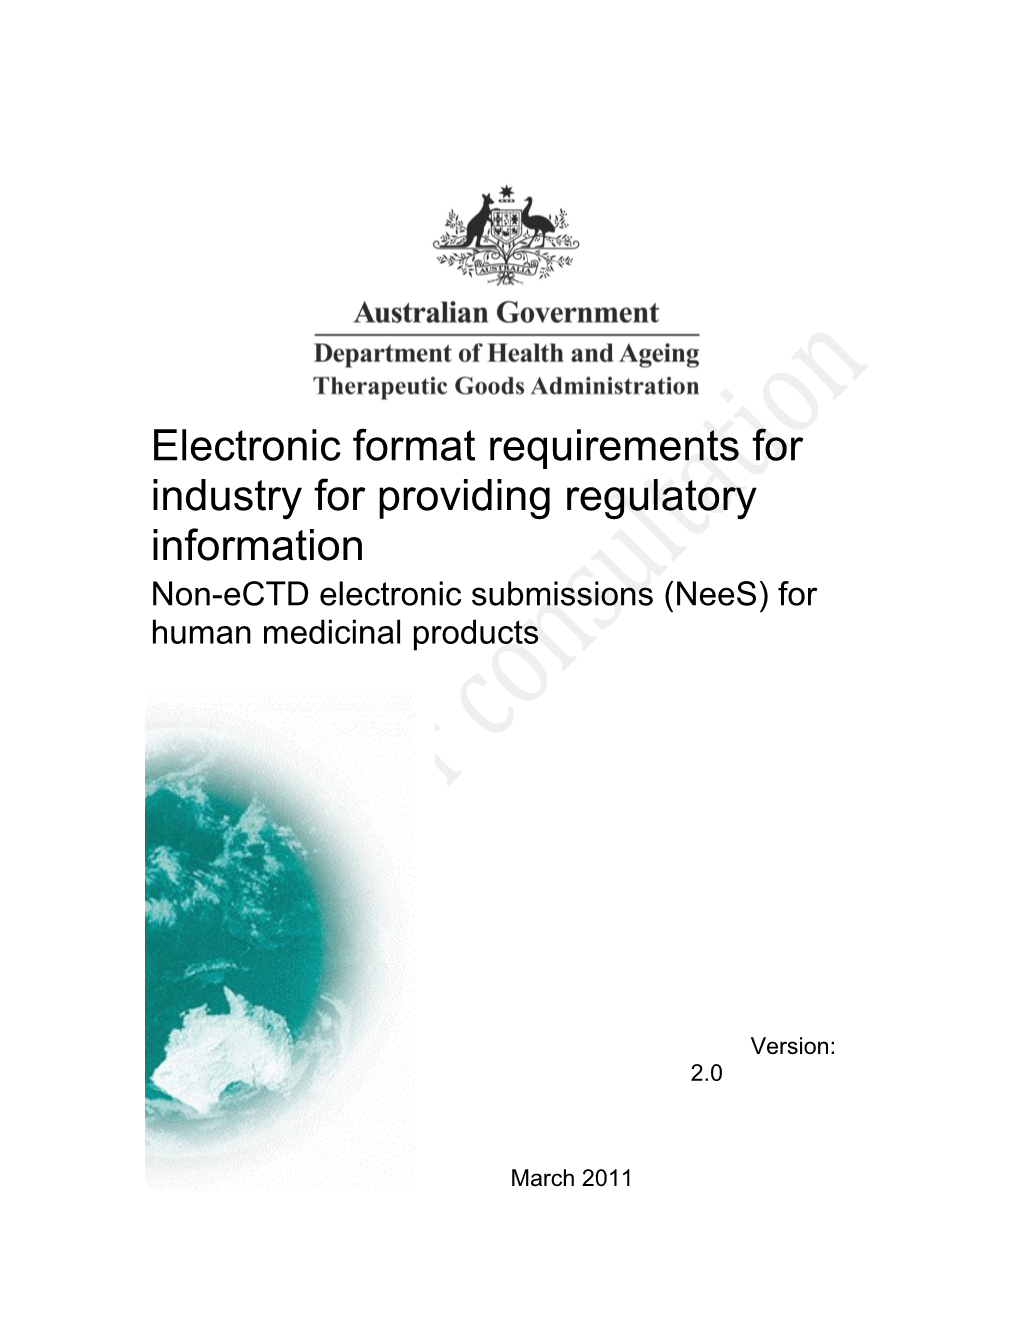 Consultation - Electtronic Format Requirements for Industry for Providing Regulatory Information